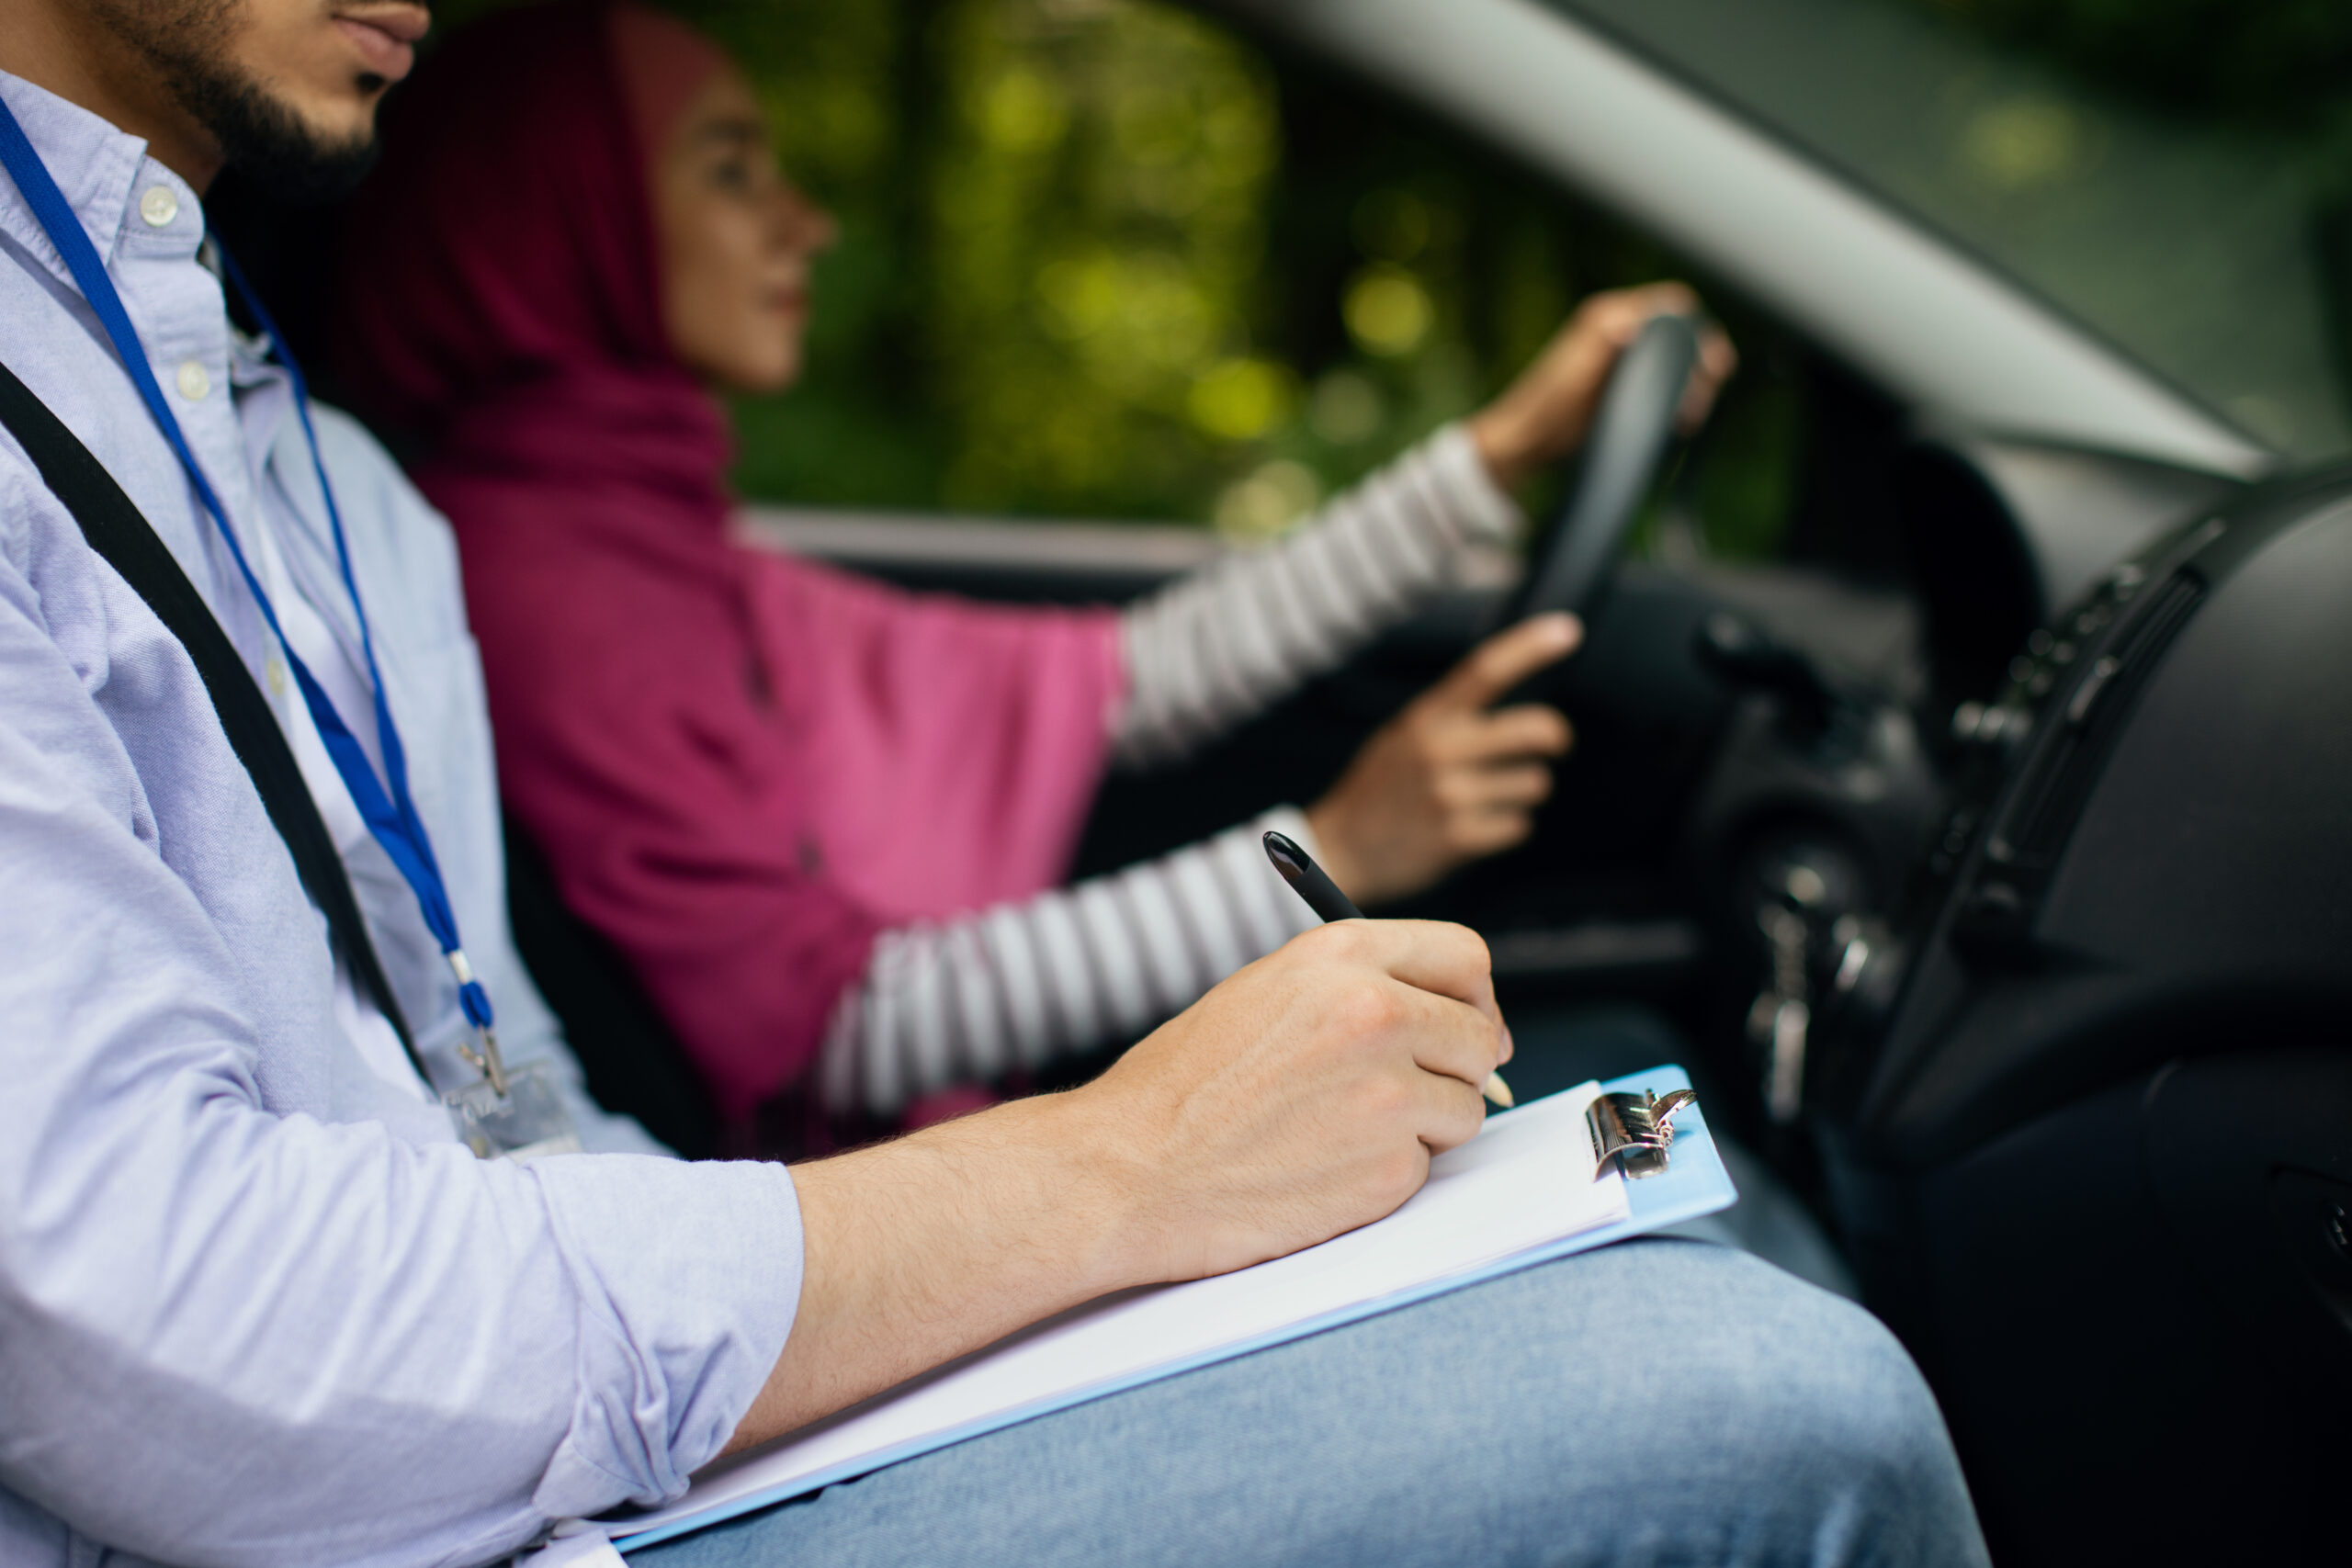 Defensive driving, Safe Driver Program, New Jersey, Traffic laws, Hazard recognition, Vehicle safety, Alcohol and drug awareness